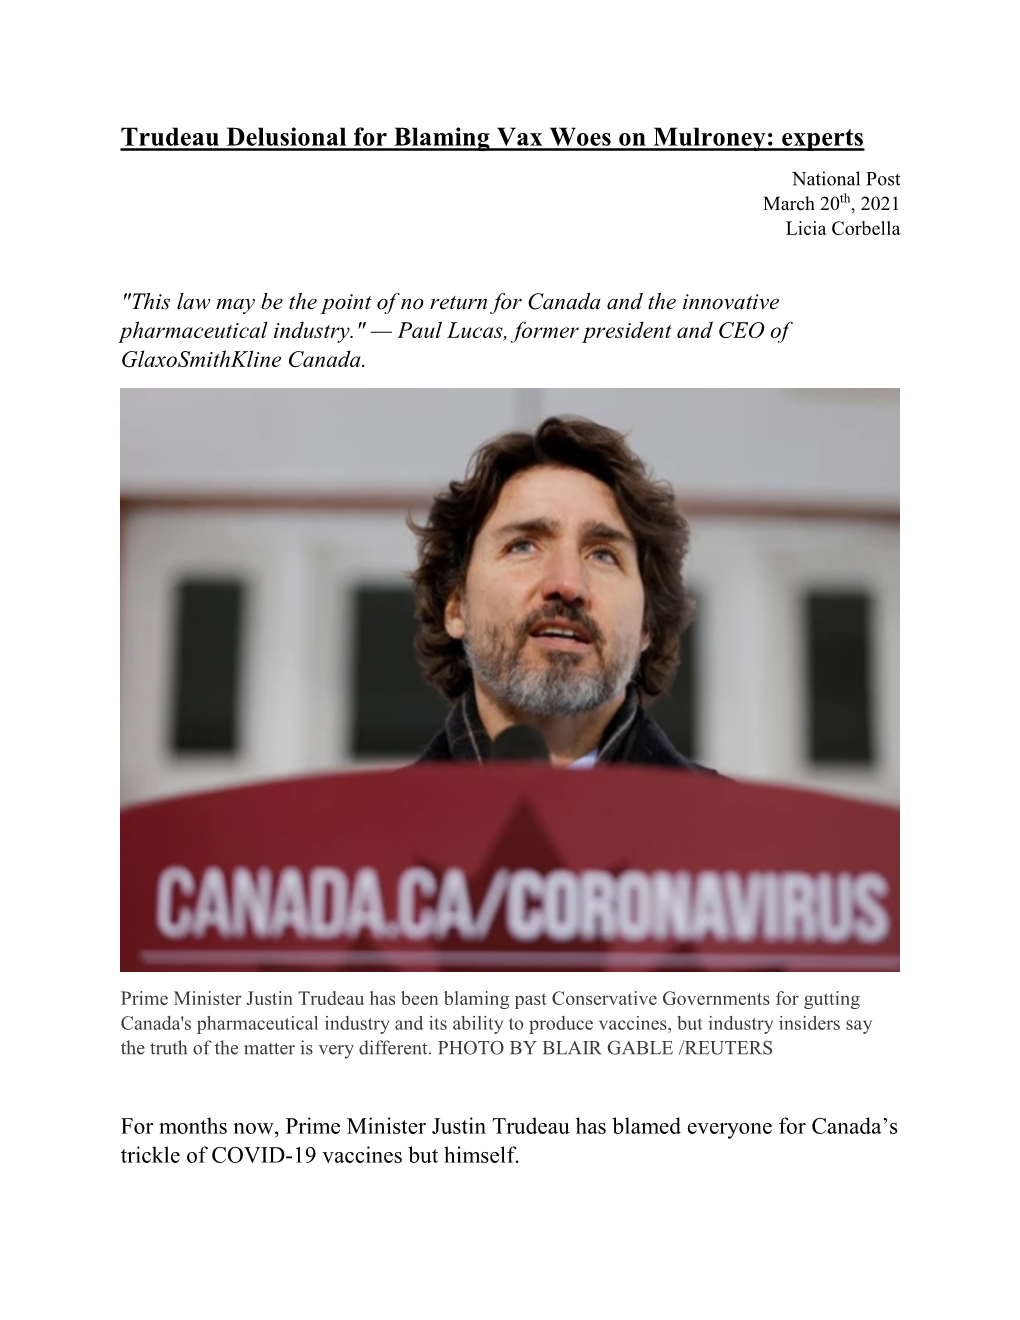 Trudeau Delusional for Blaming Vax Woes on Mulroney: Experts National Post March 20Th, 2021 Licia Corbella